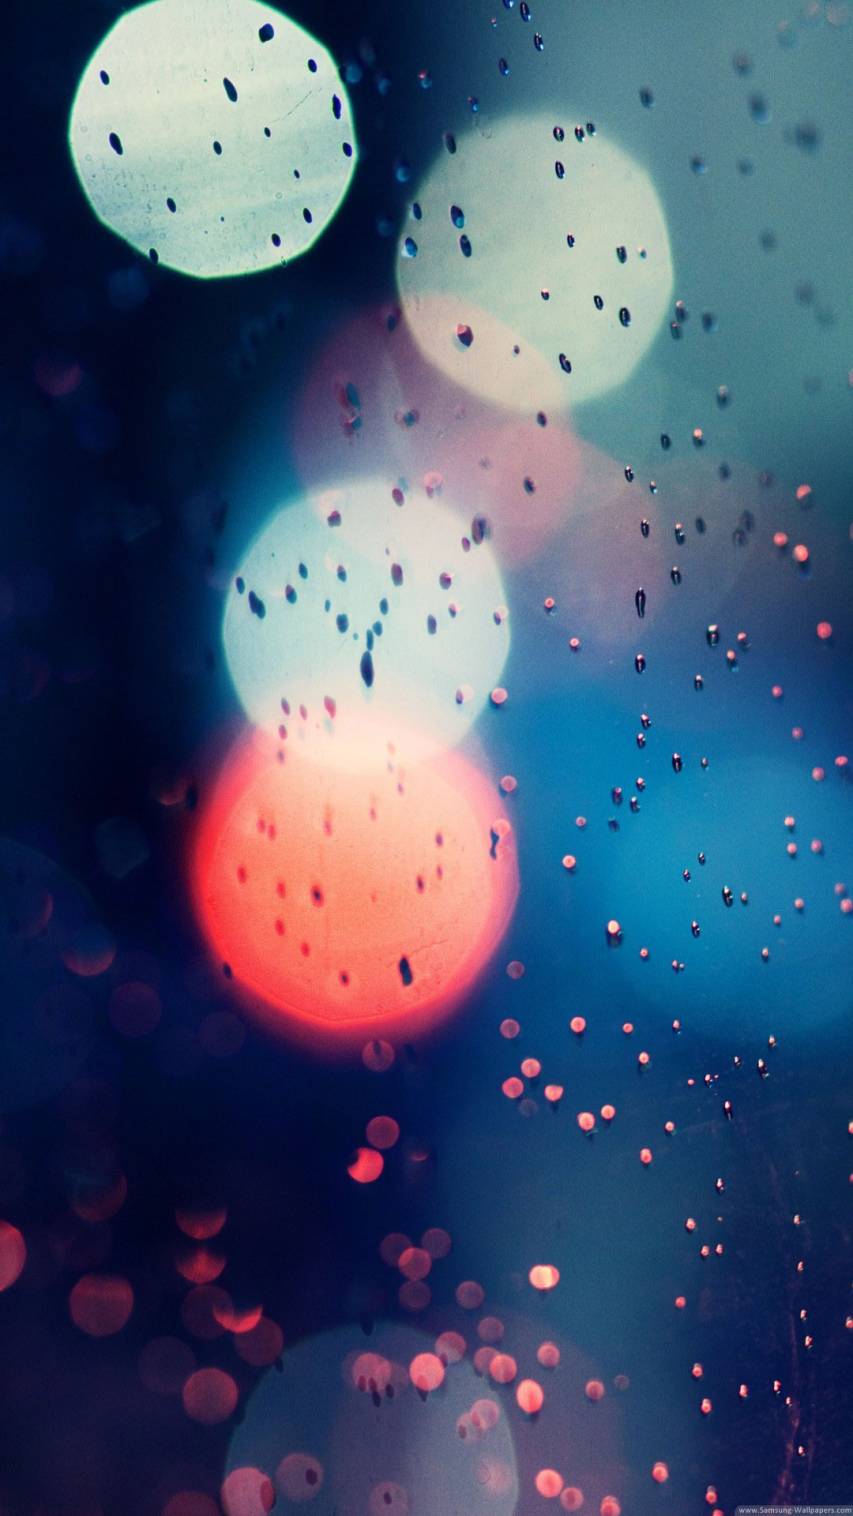 Drops, Bubles free iPhone 6 Plus image Wallpapers